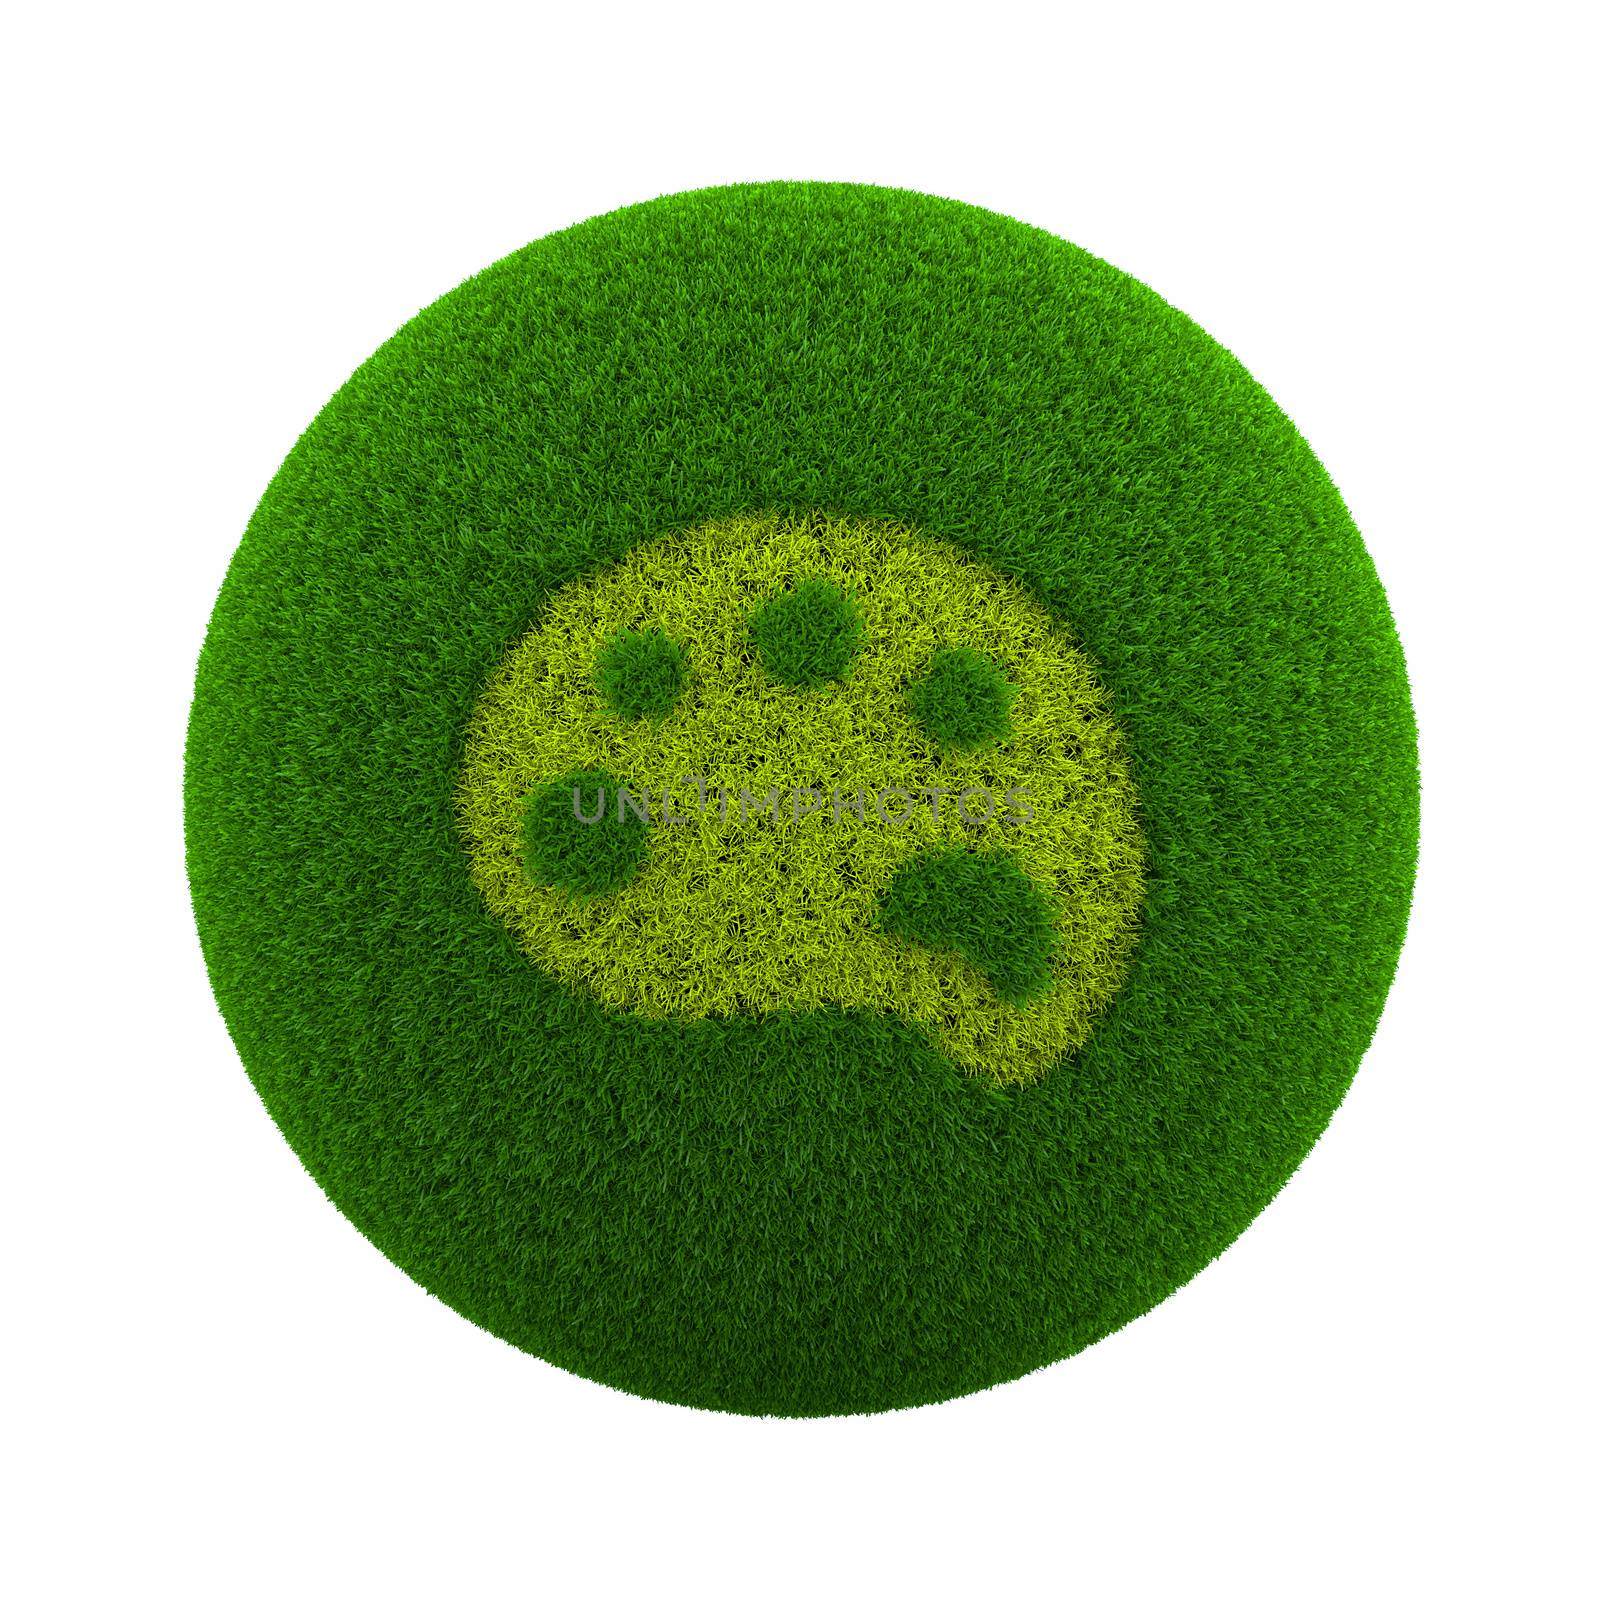 Green Globe with Grass Cutted in the Shape of a Palette Symbol 3D Illustration Isolated on White Background